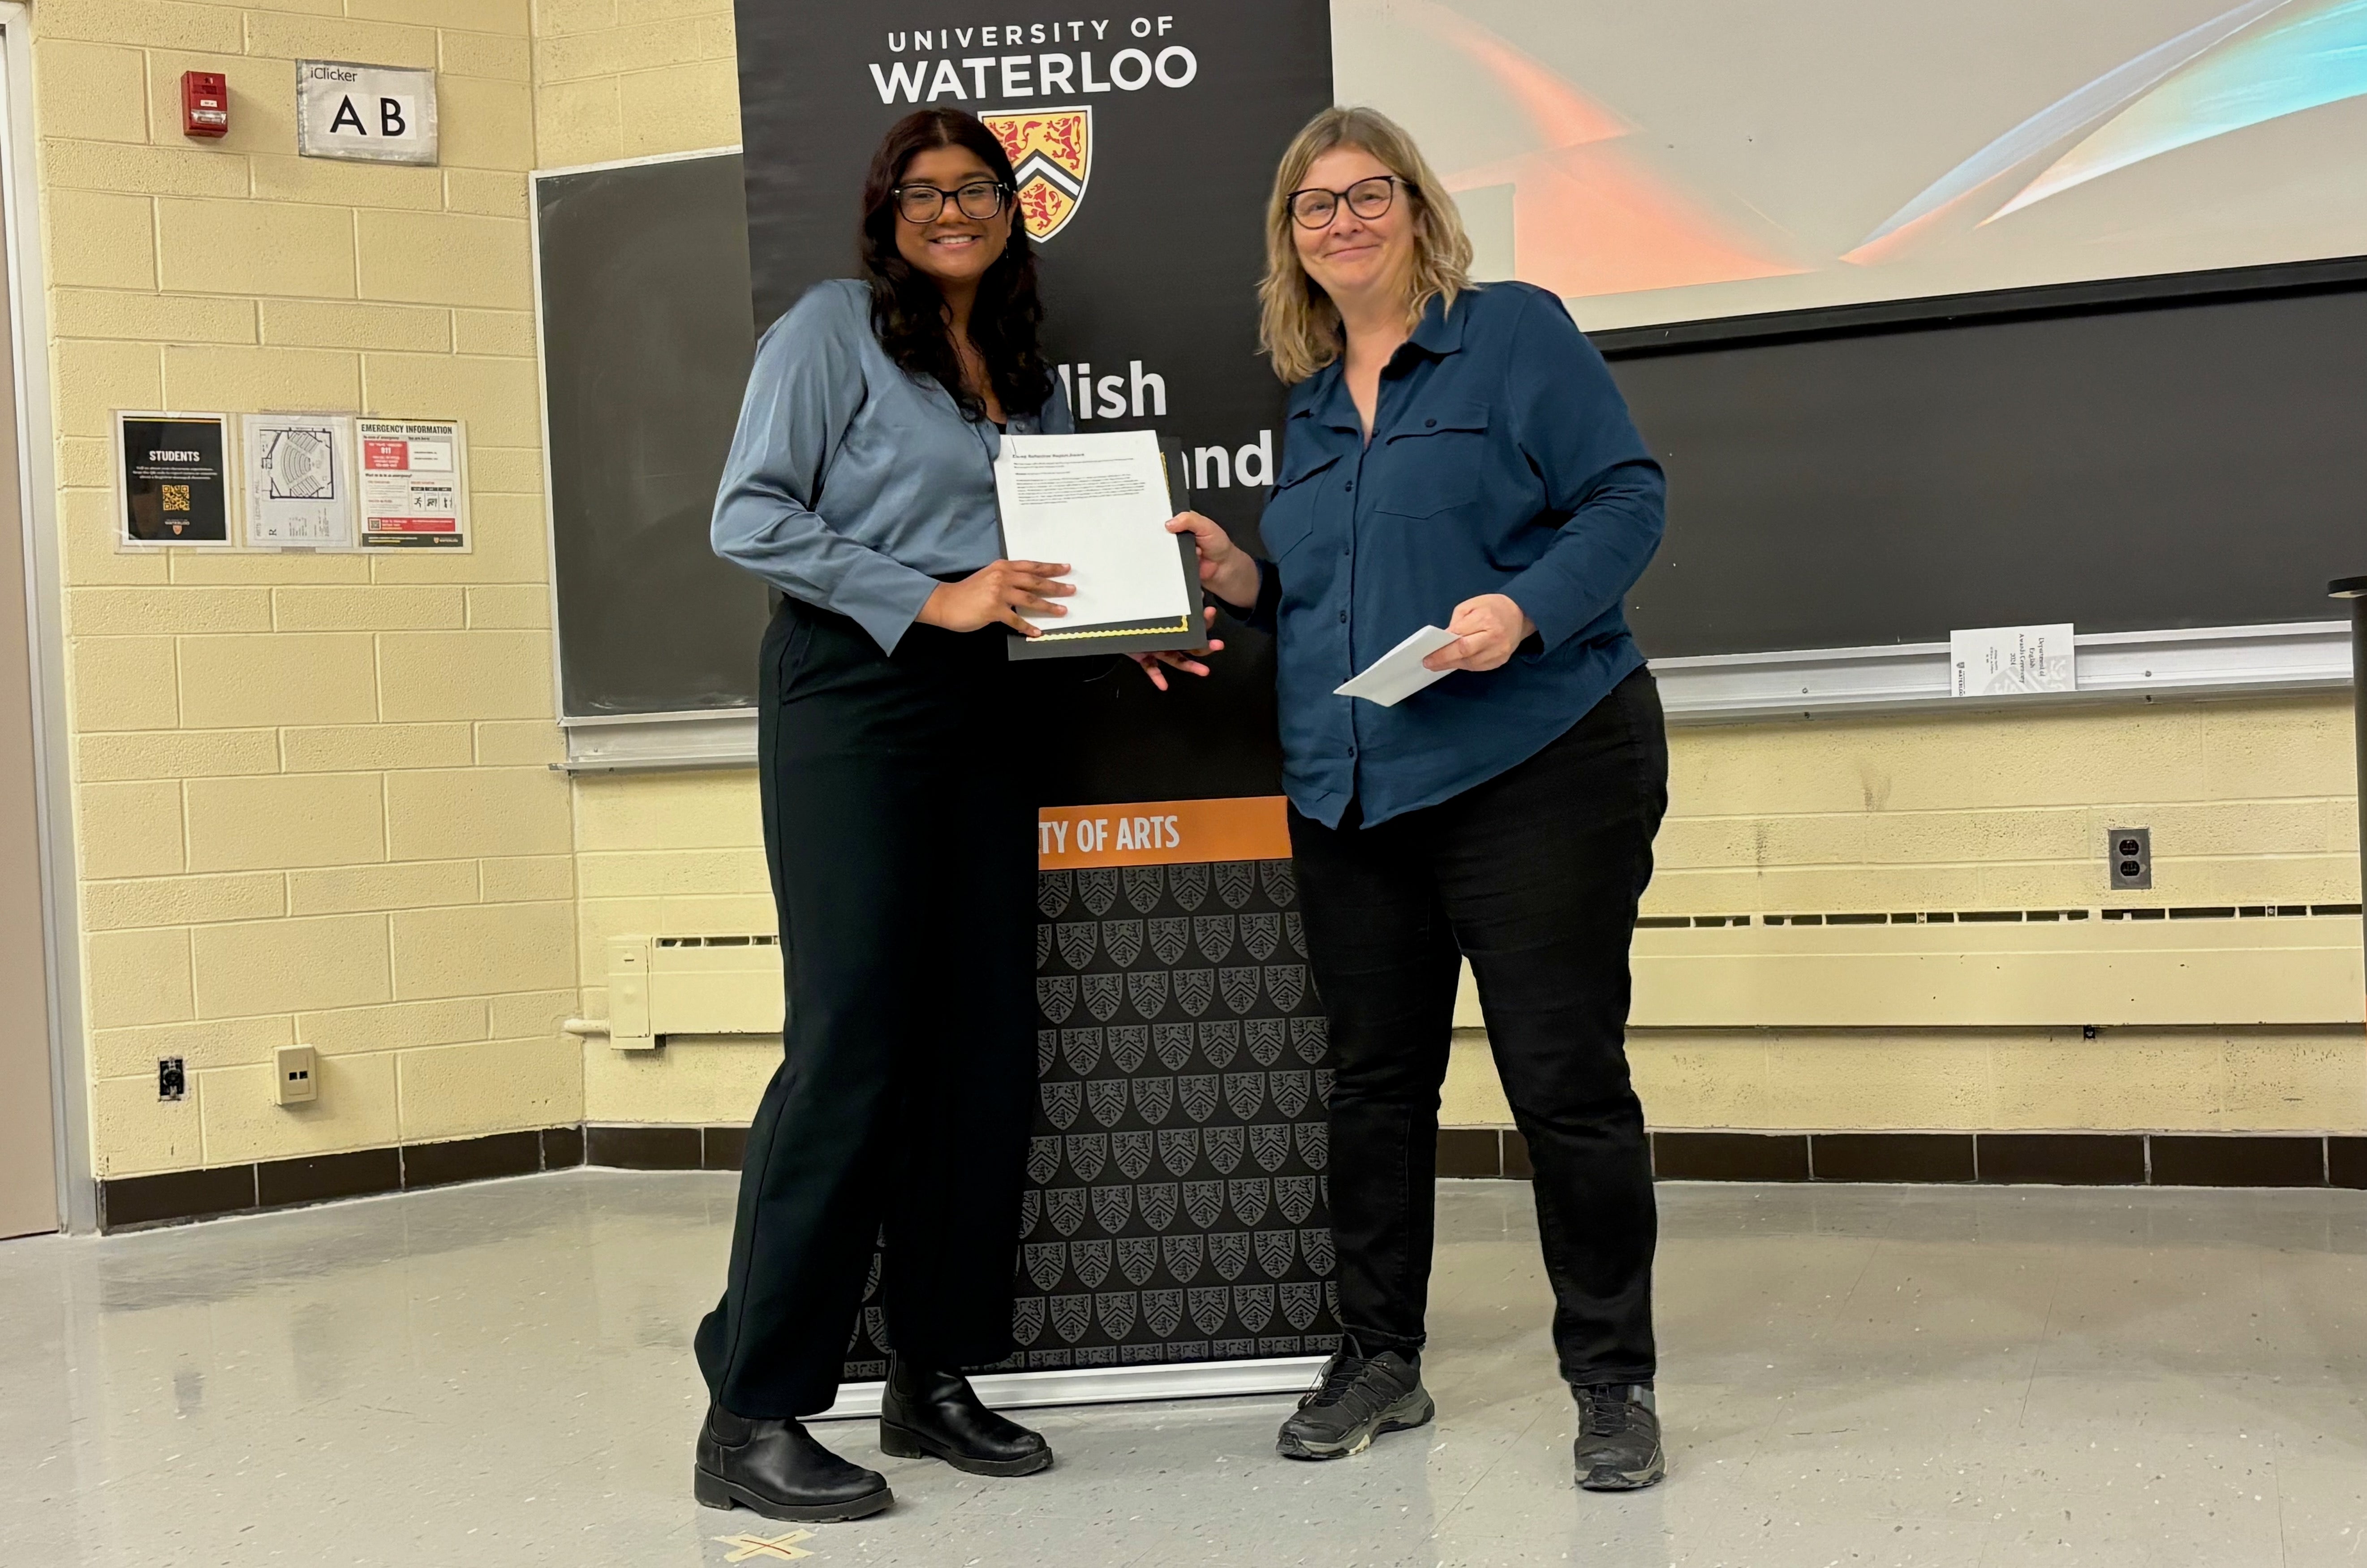 Vyshnavi Rajeevan receives the Co-op Reflective Report Award from Victoria Lamont.